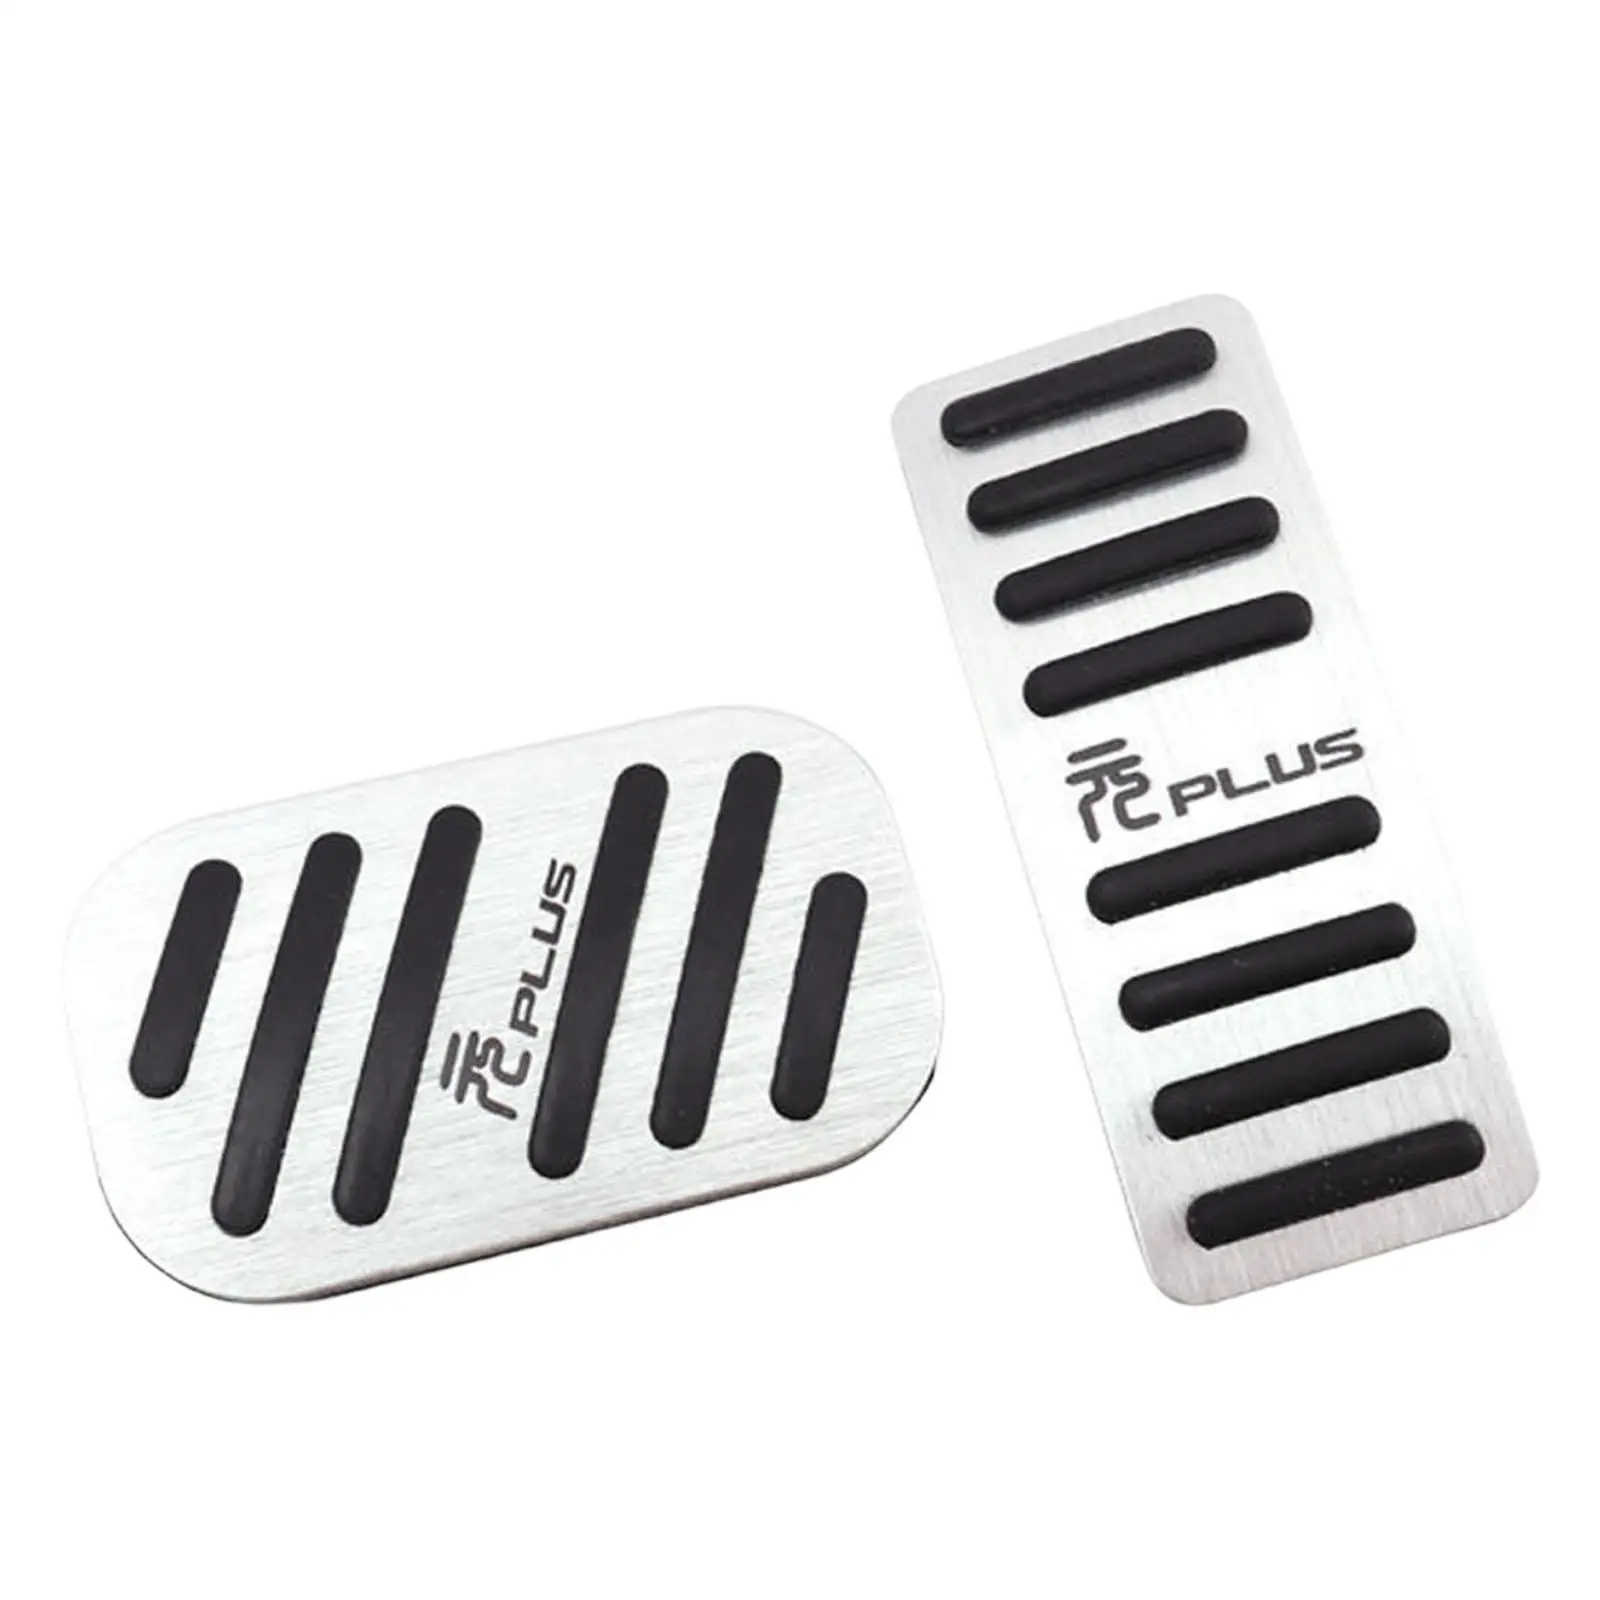 Brake Pedal Cover Gas Pedal Cover Kit Foot Pedals Pads for Byd Atto 3 Yuan Plus